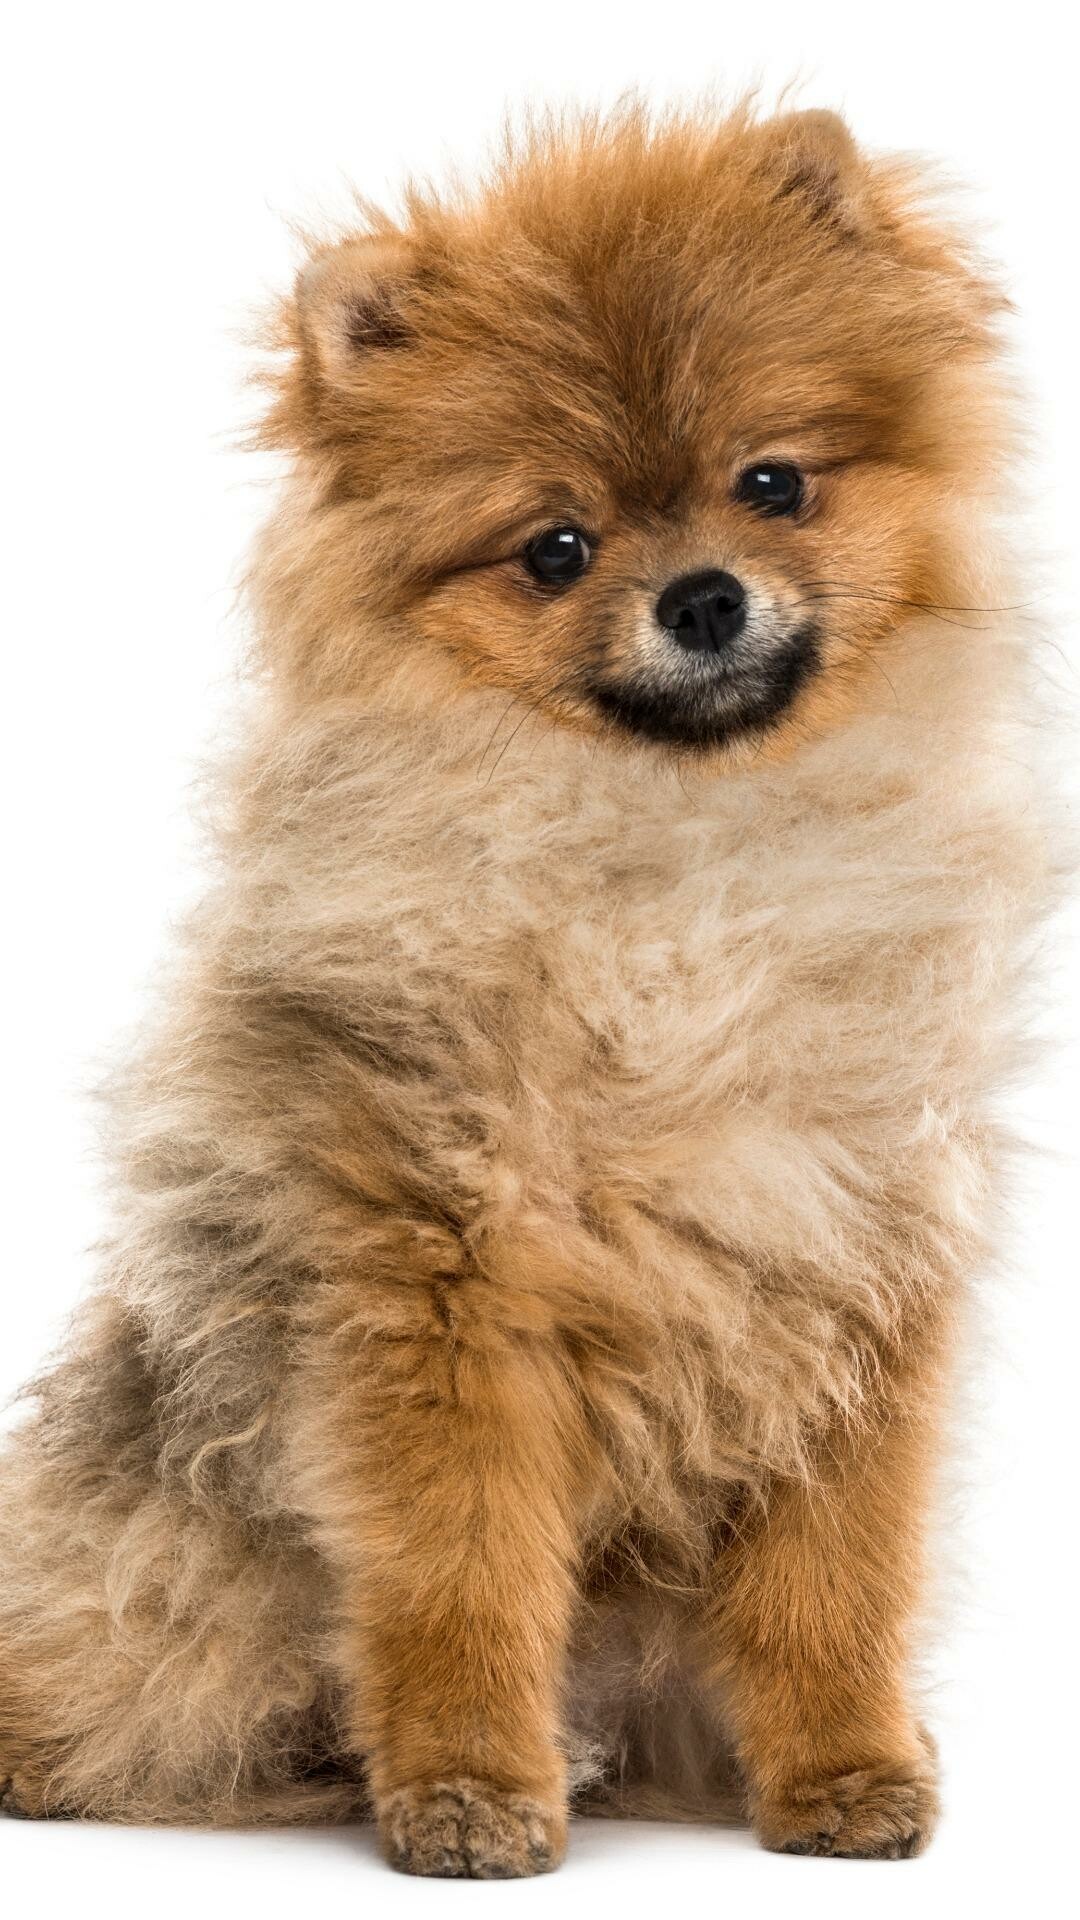 Pomeranian: Developed from the ancient Spitz breeds of the far northern countries. 1080x1920 Full HD Wallpaper.